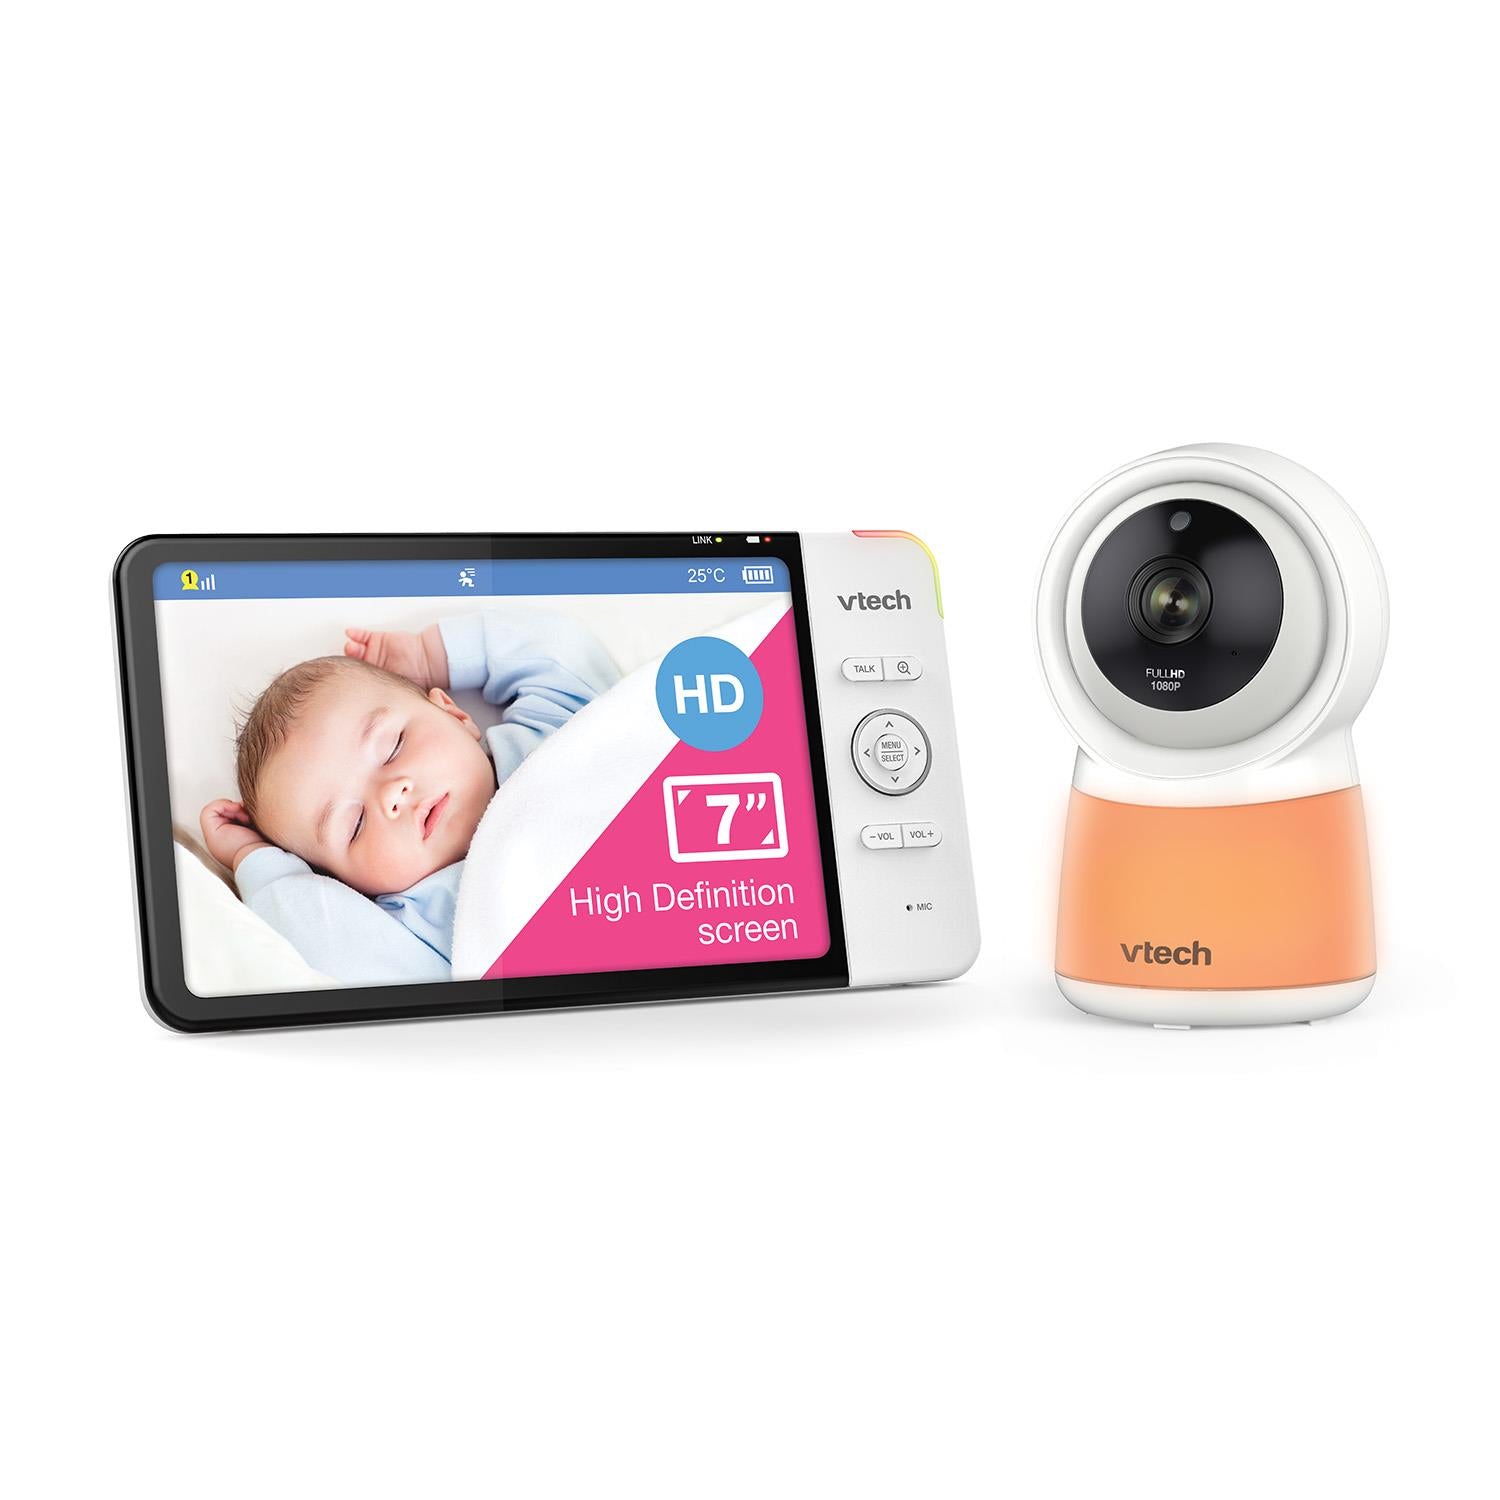 vtech rm7754hd 7" smart wi-fi hd video baby monitor with remote access